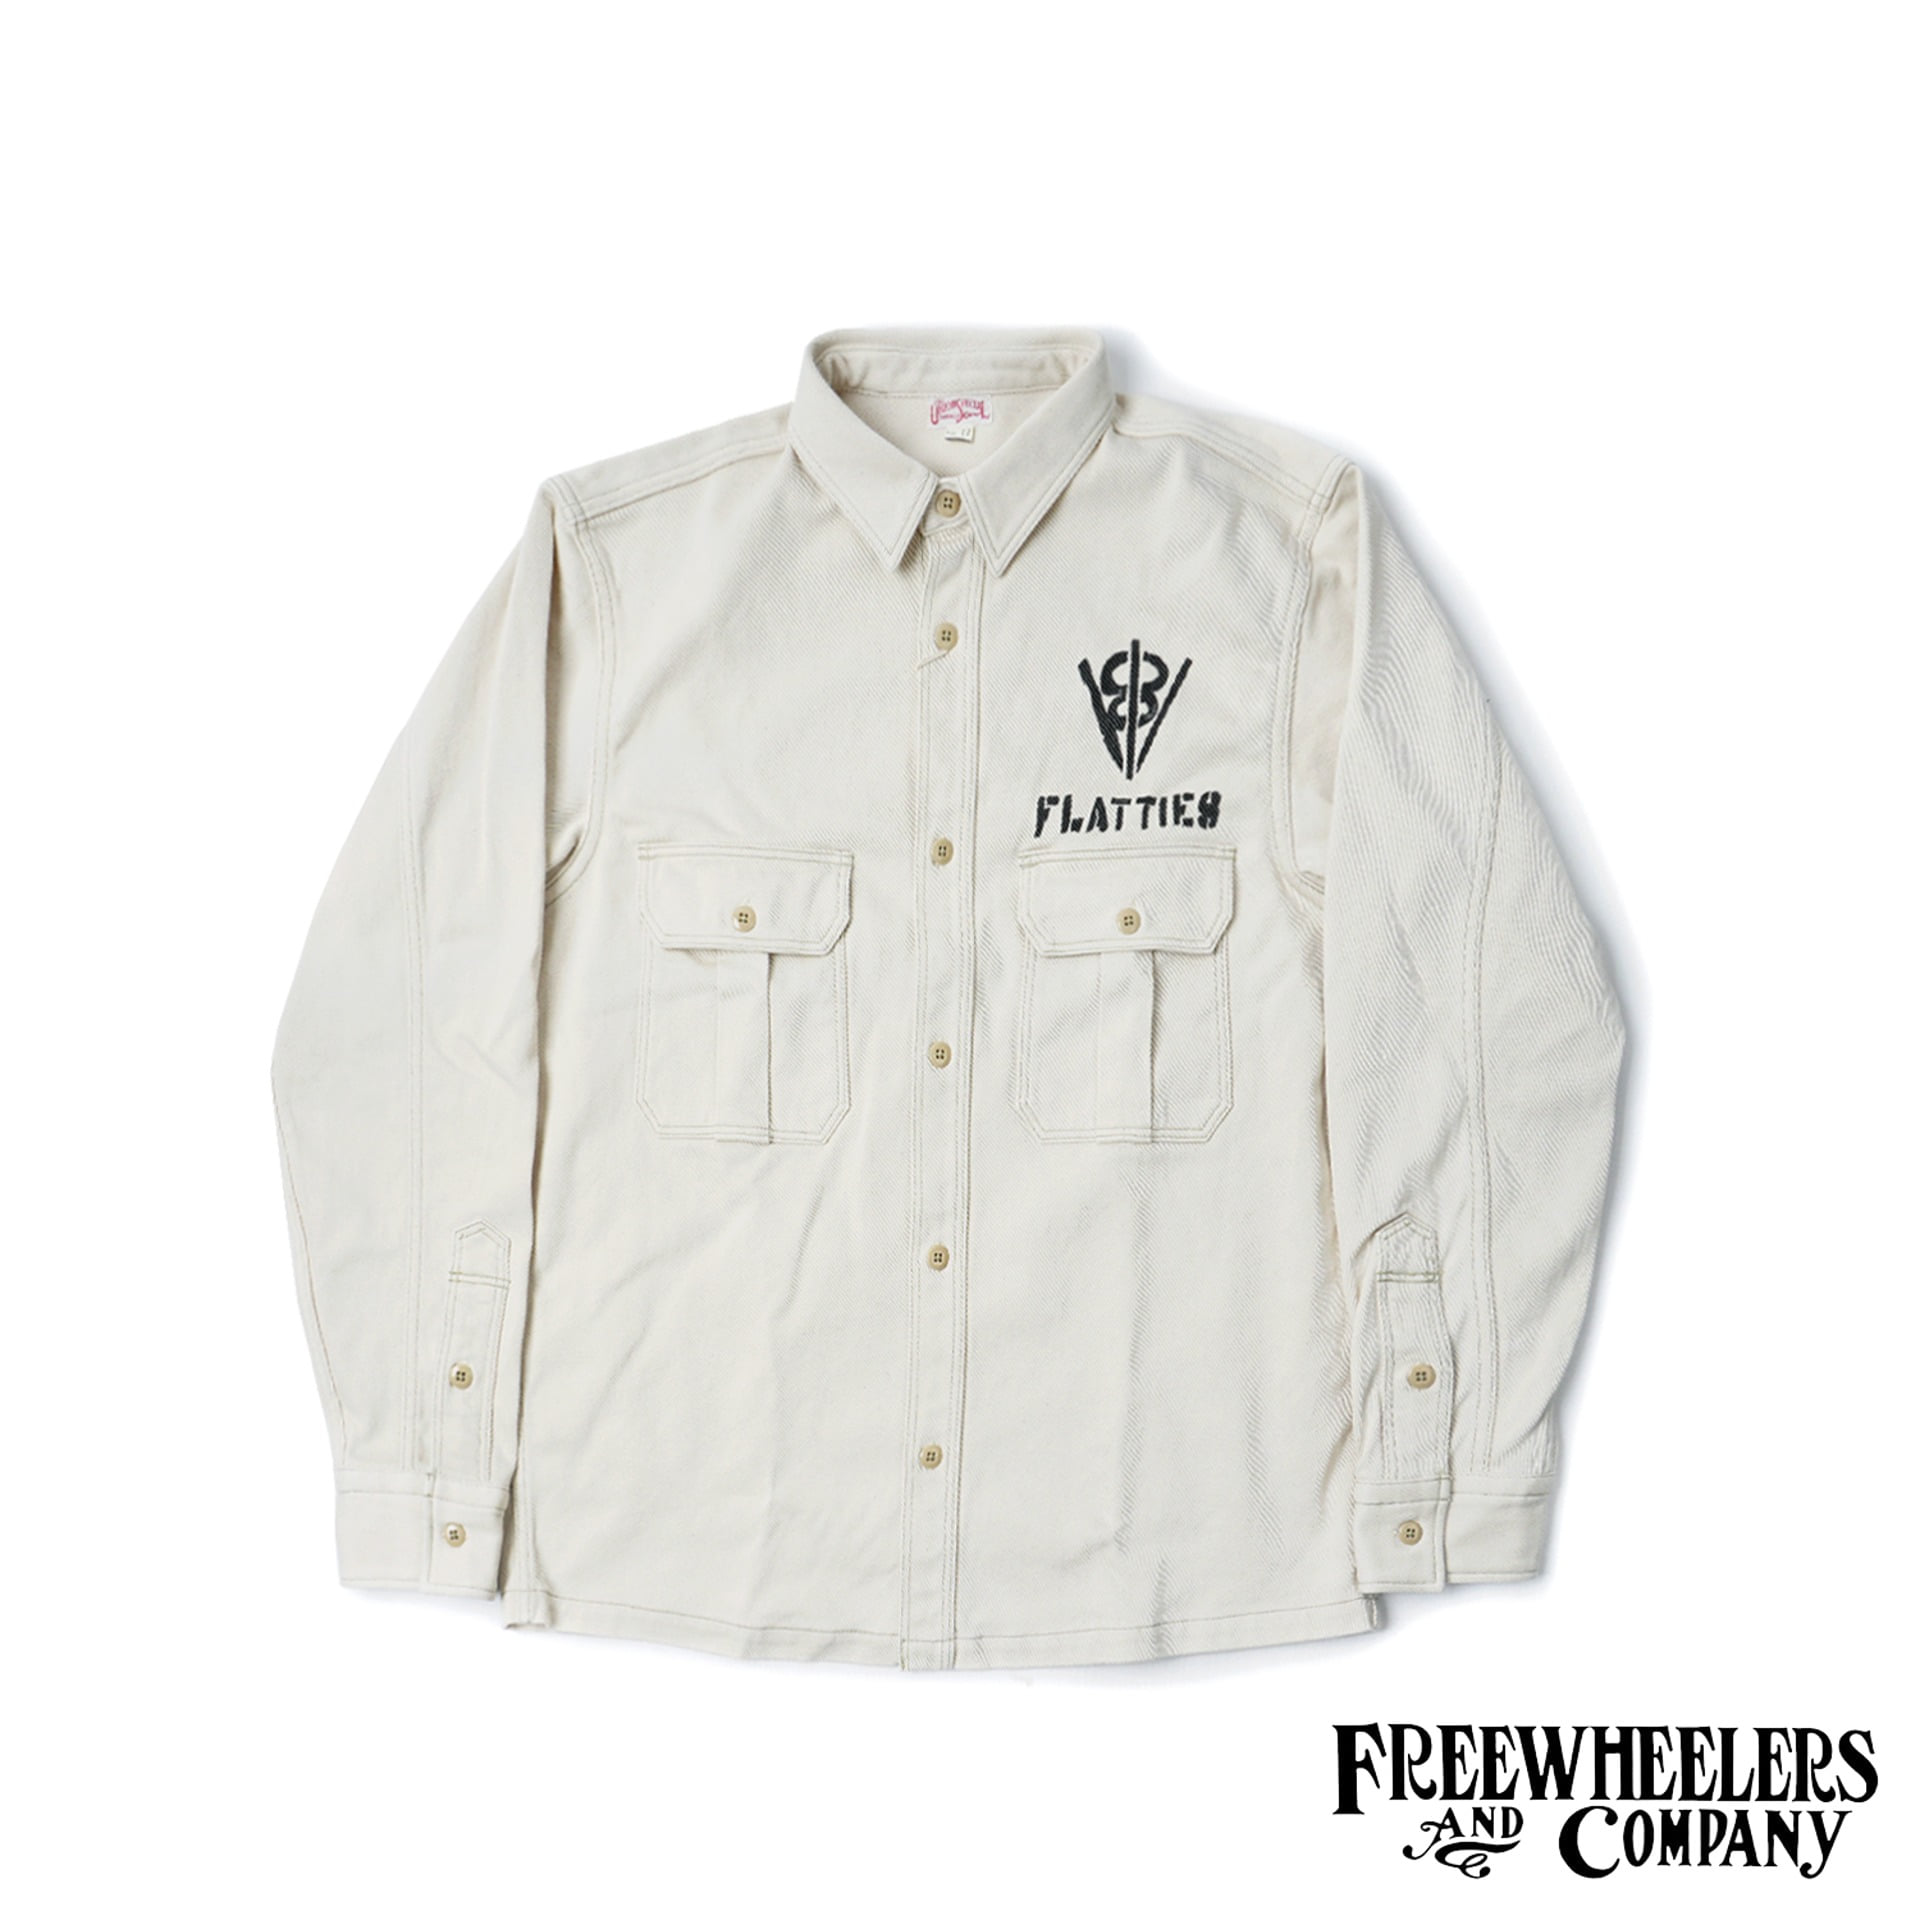 [Union Special Overalls] LONG SLEEVE WORK SHIRTS  FUELER  &quot;El Mirage DRY LAKE V8 FLATTIES&quot; (Cream)